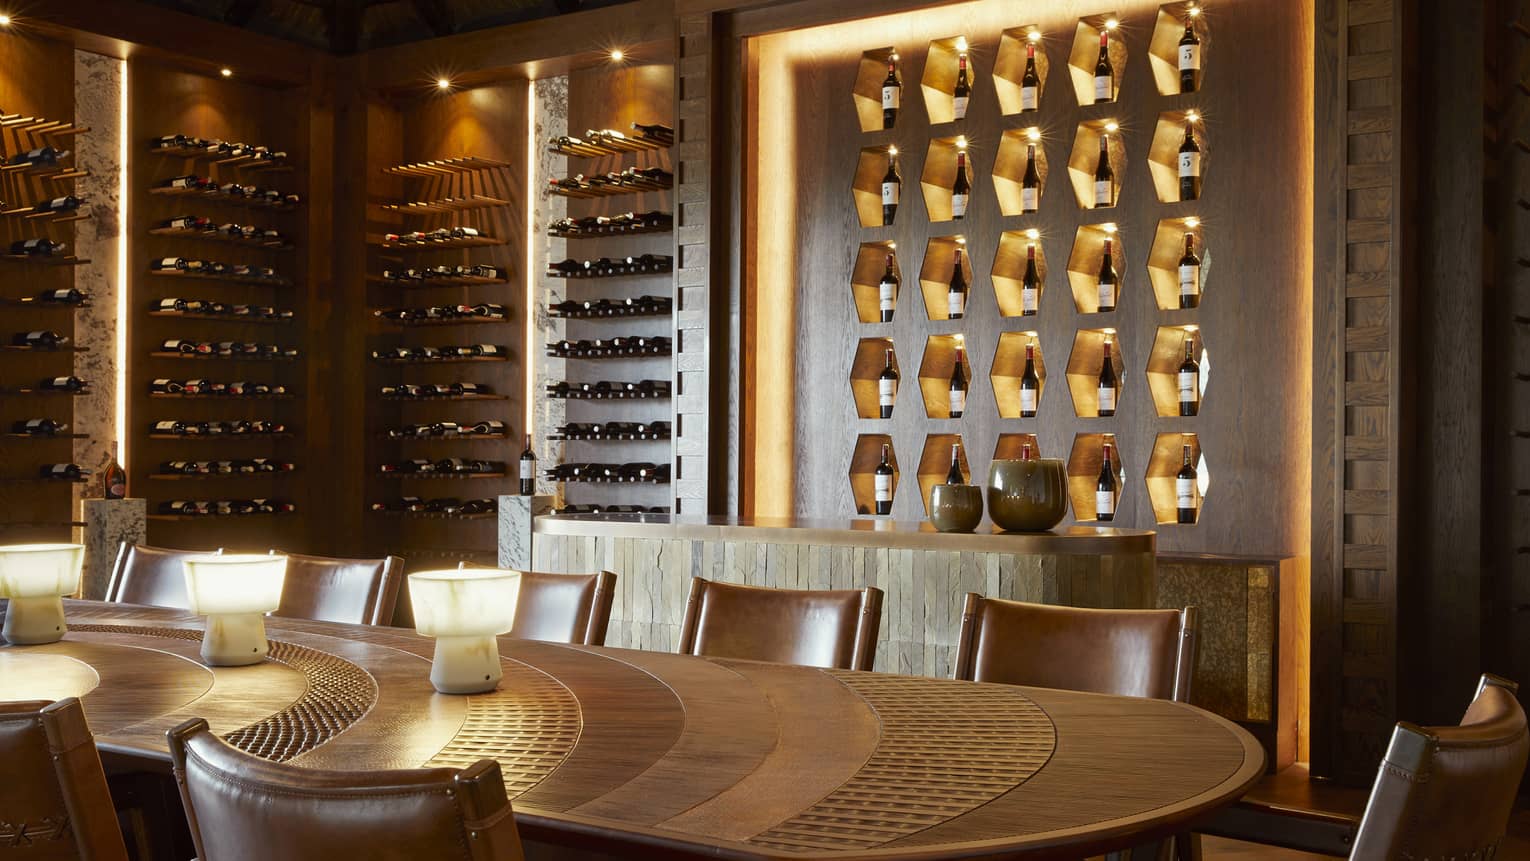 Contemporary wine cellar with uplit bottles on walls and oval-shaped dining table in centre